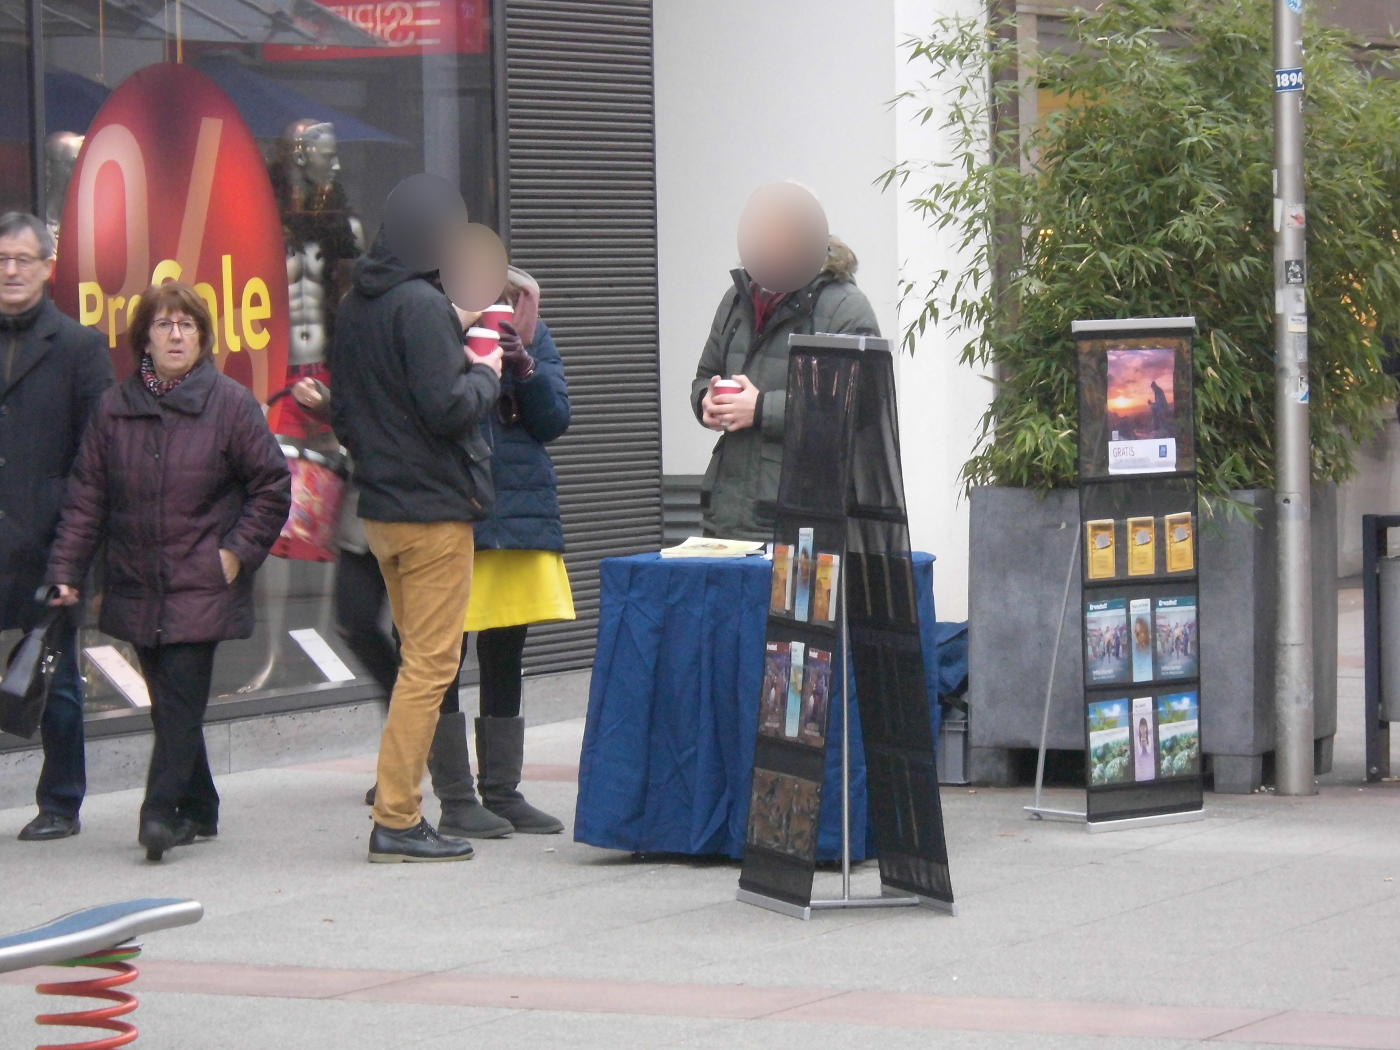 Jehovah's Witnesses in Bruchsal do not drink human blood